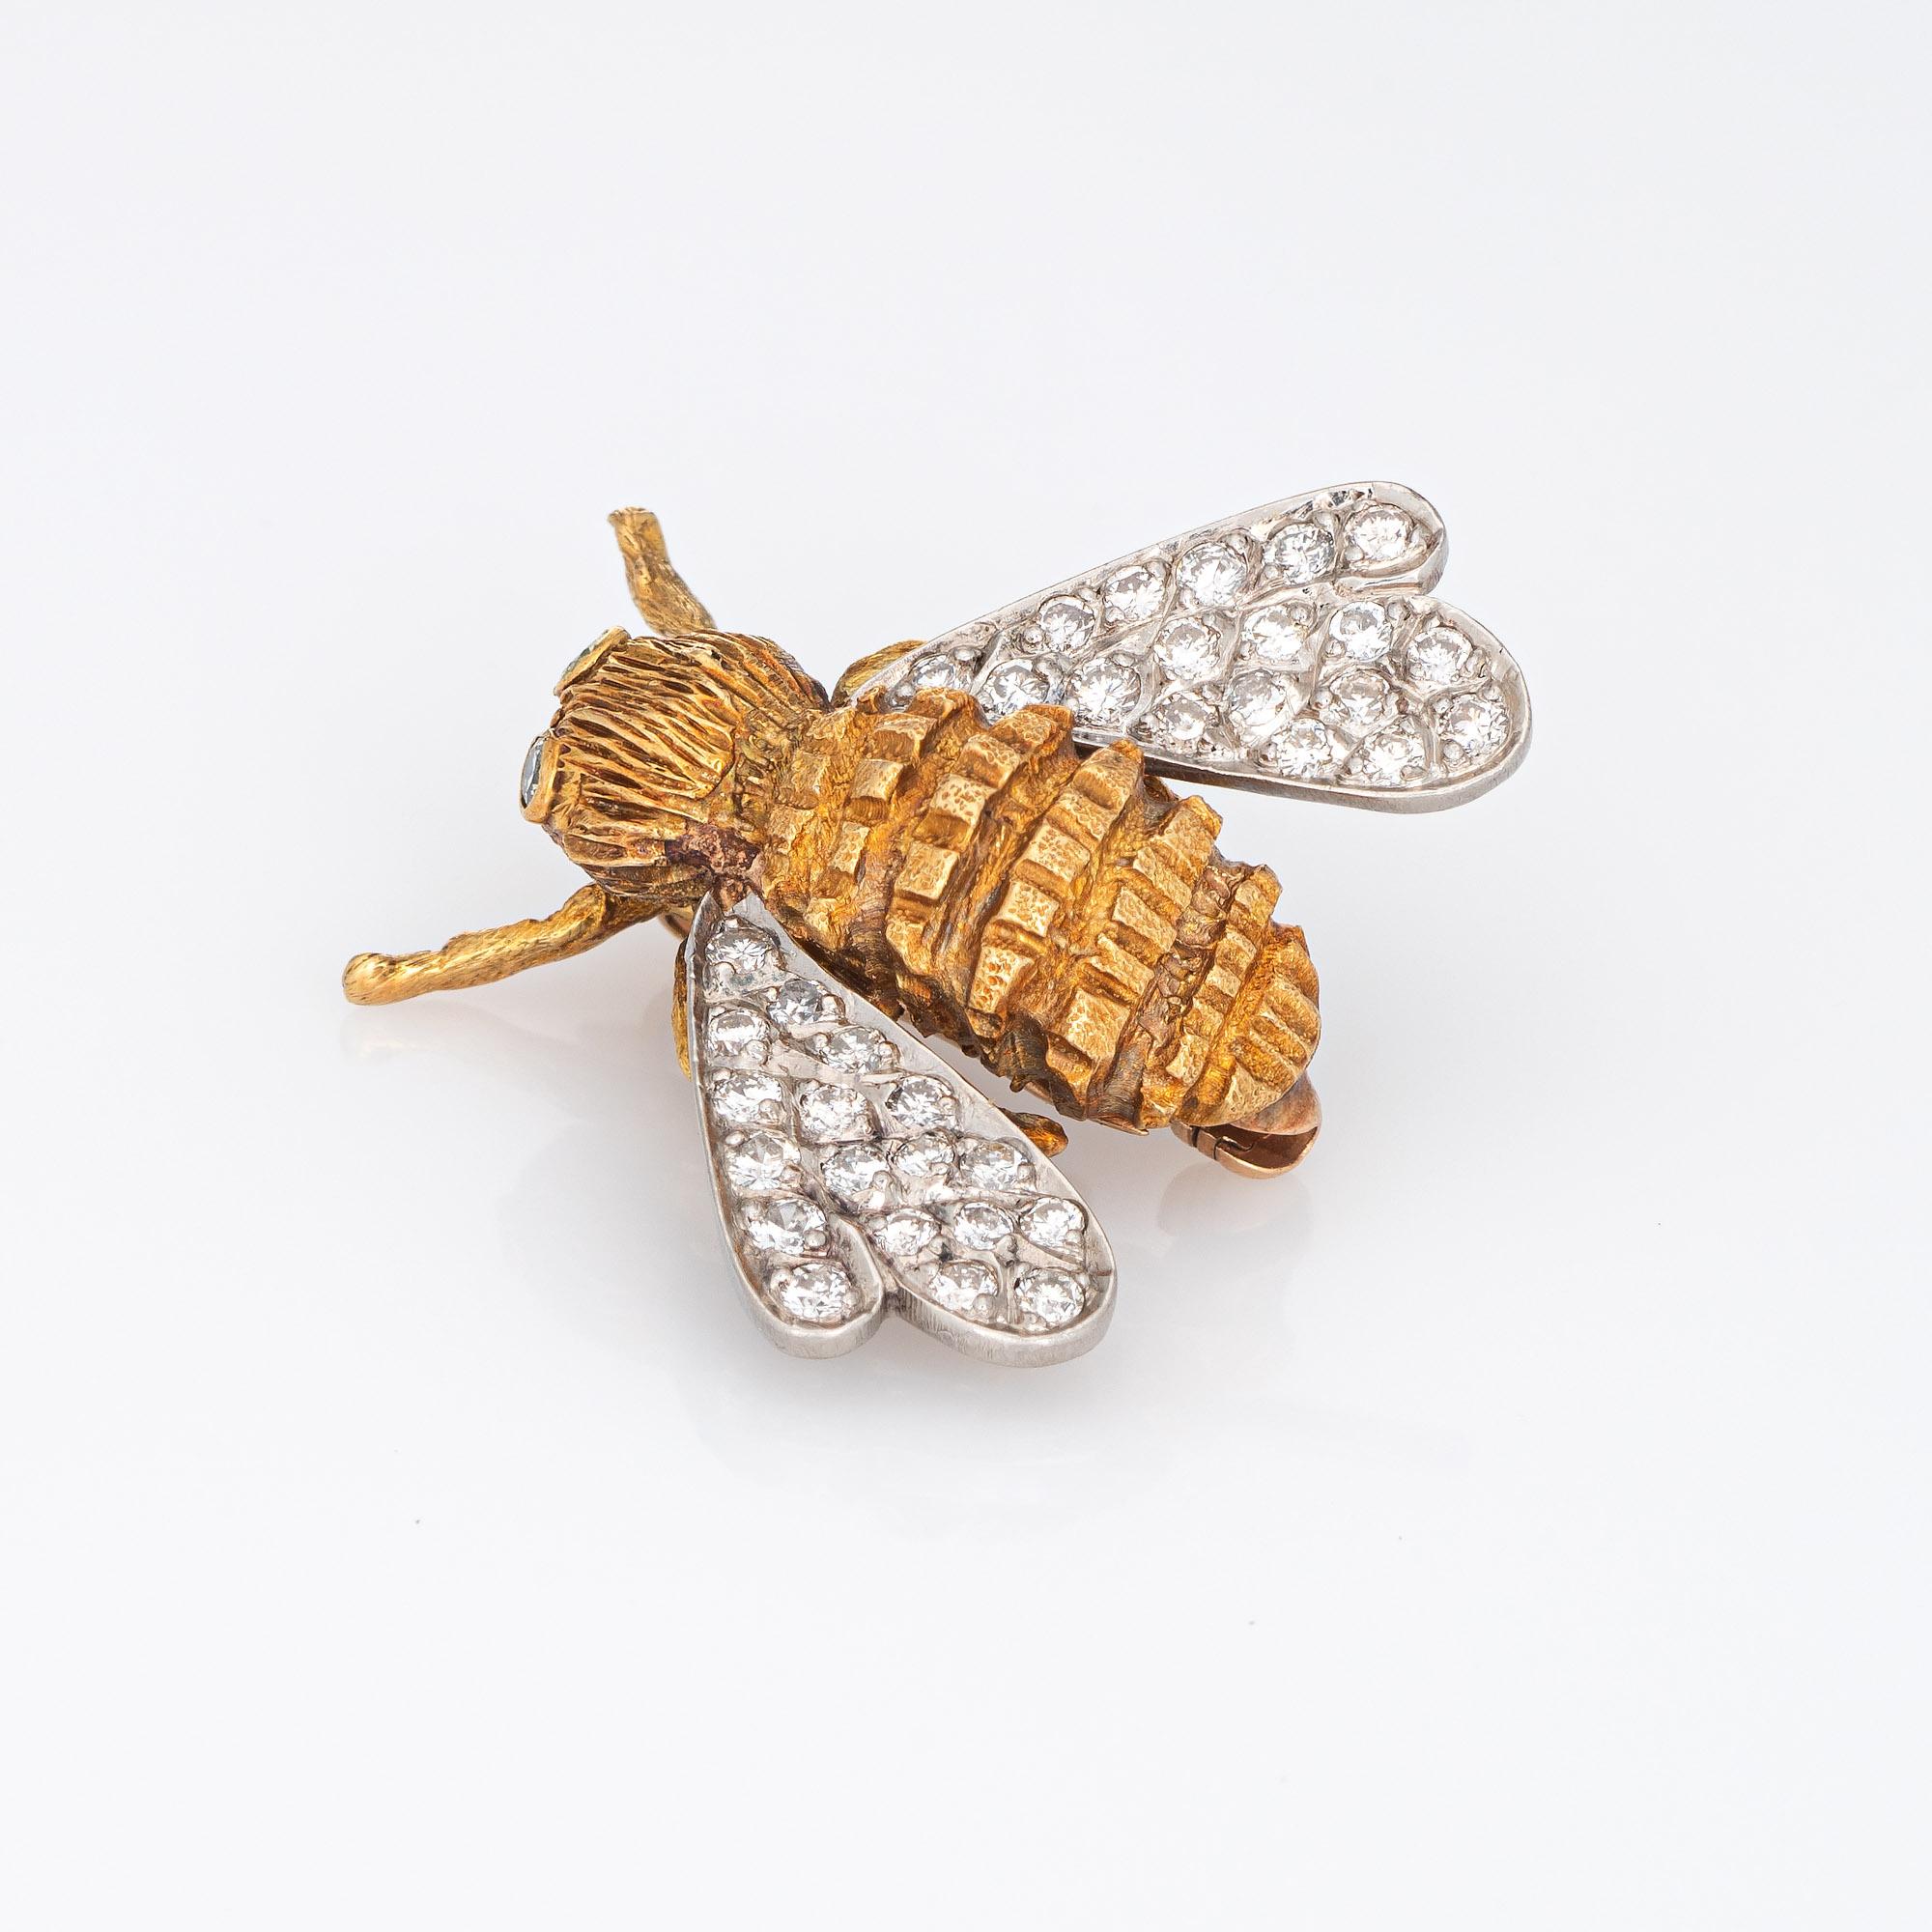 Finely detailed vintage diamond bumble bee brooch, crafted in 18 karat yellow gold.  

Round brilliant cut diamonds total an estimated 0.50 carats 9estimated at H-I color and VS1-2 clarity).    

The finely detailed bee features a textured body and